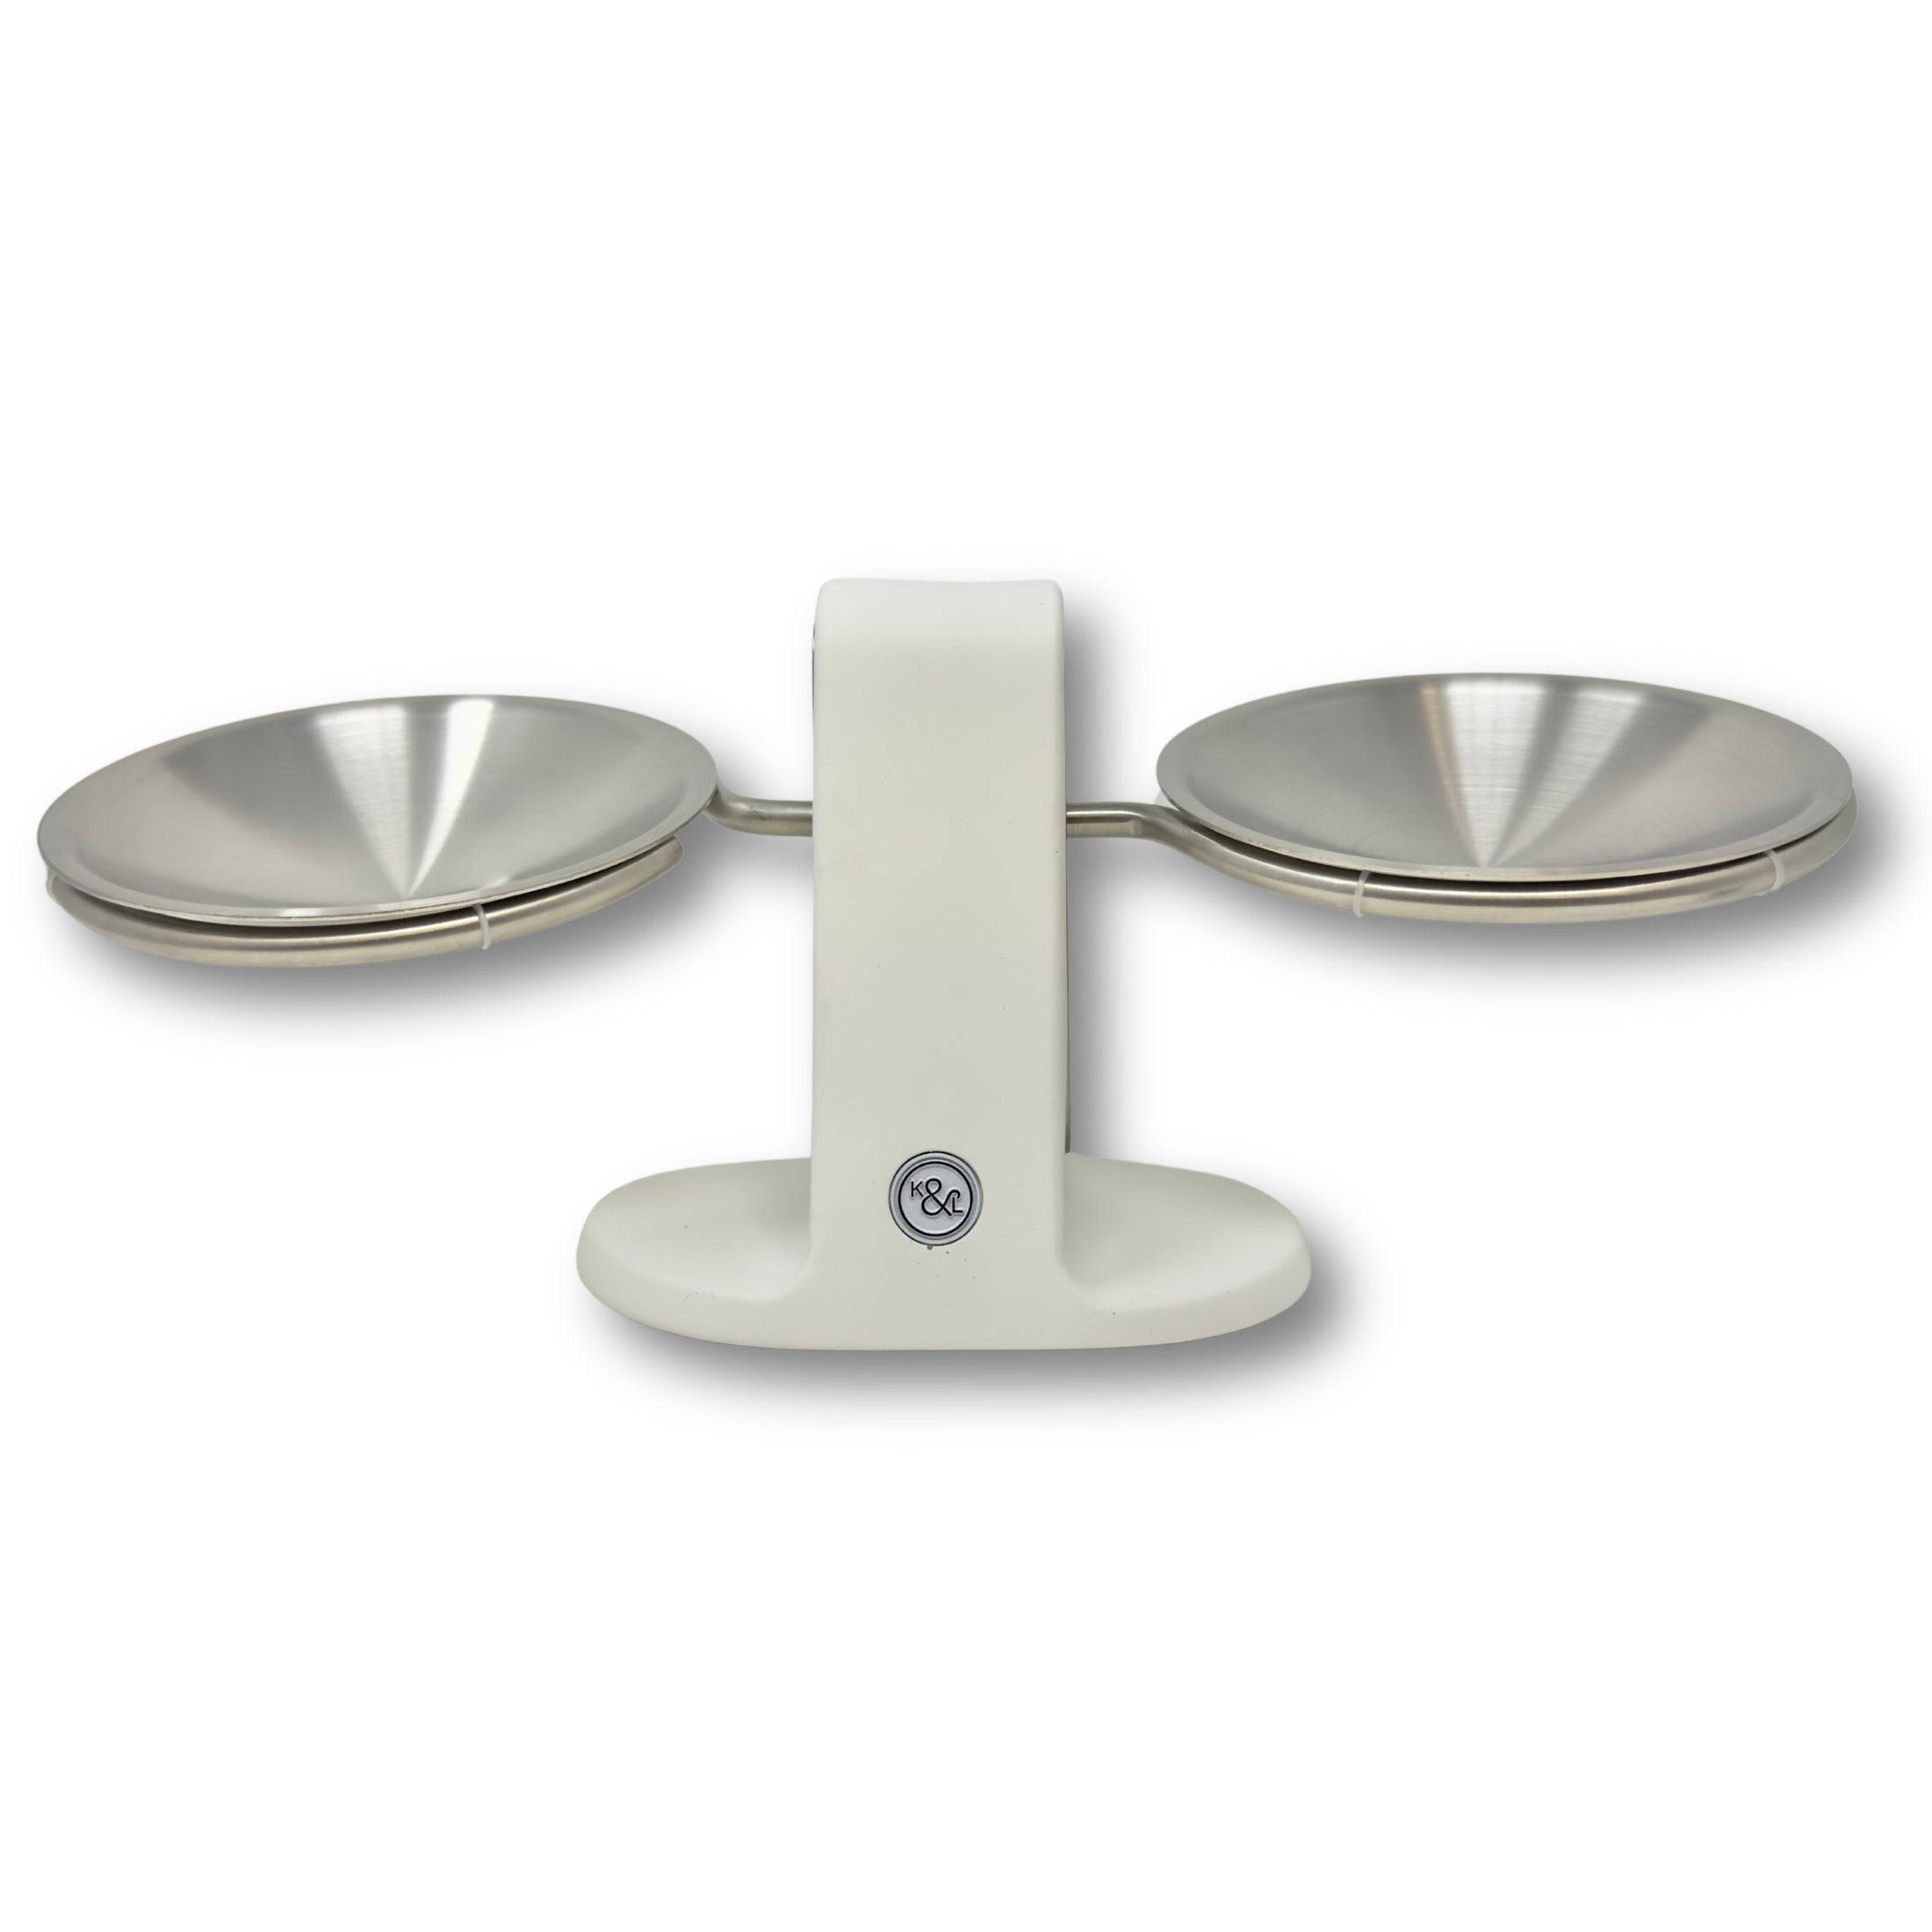 Dine Height Adjustable Cat Food Bowl White and Silver